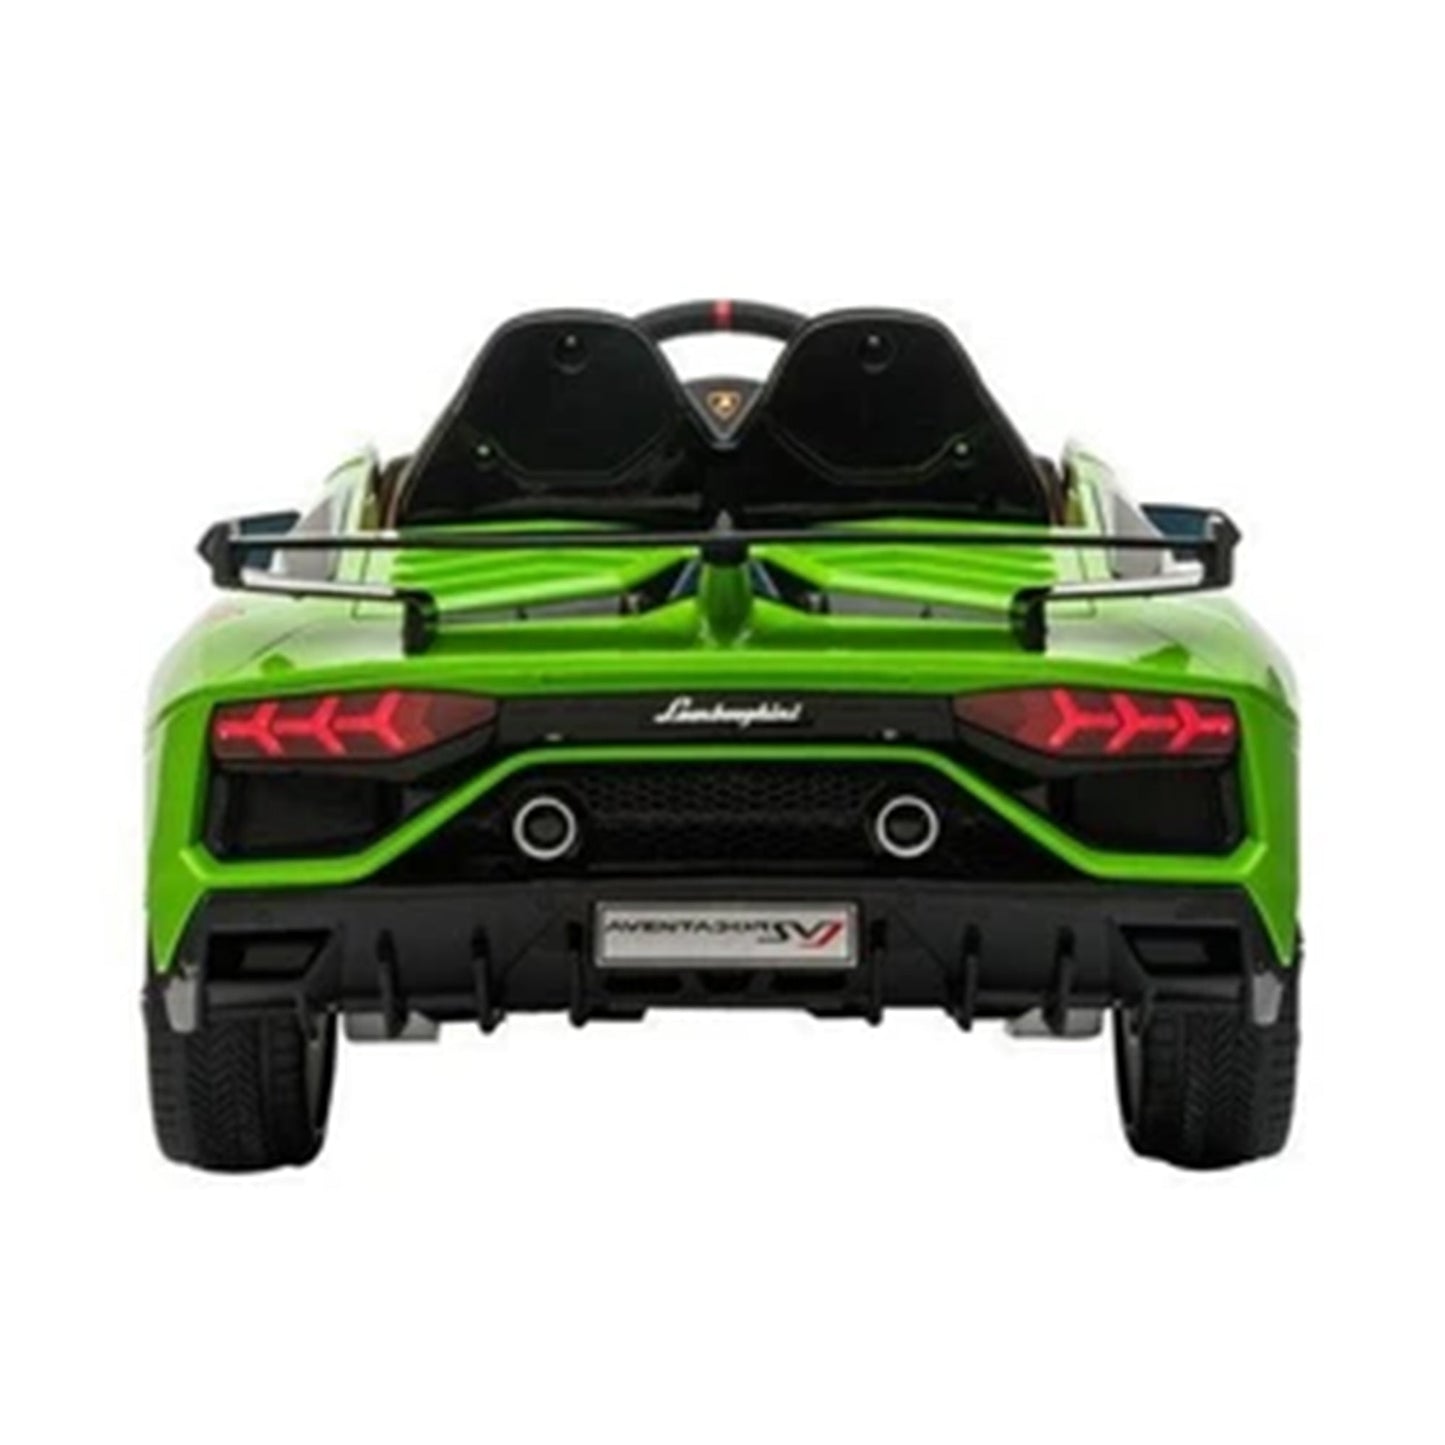 "Green Lamborghini SVJ Kids Ride On with Parental 2.4G Remote Control from Kids Car Store"